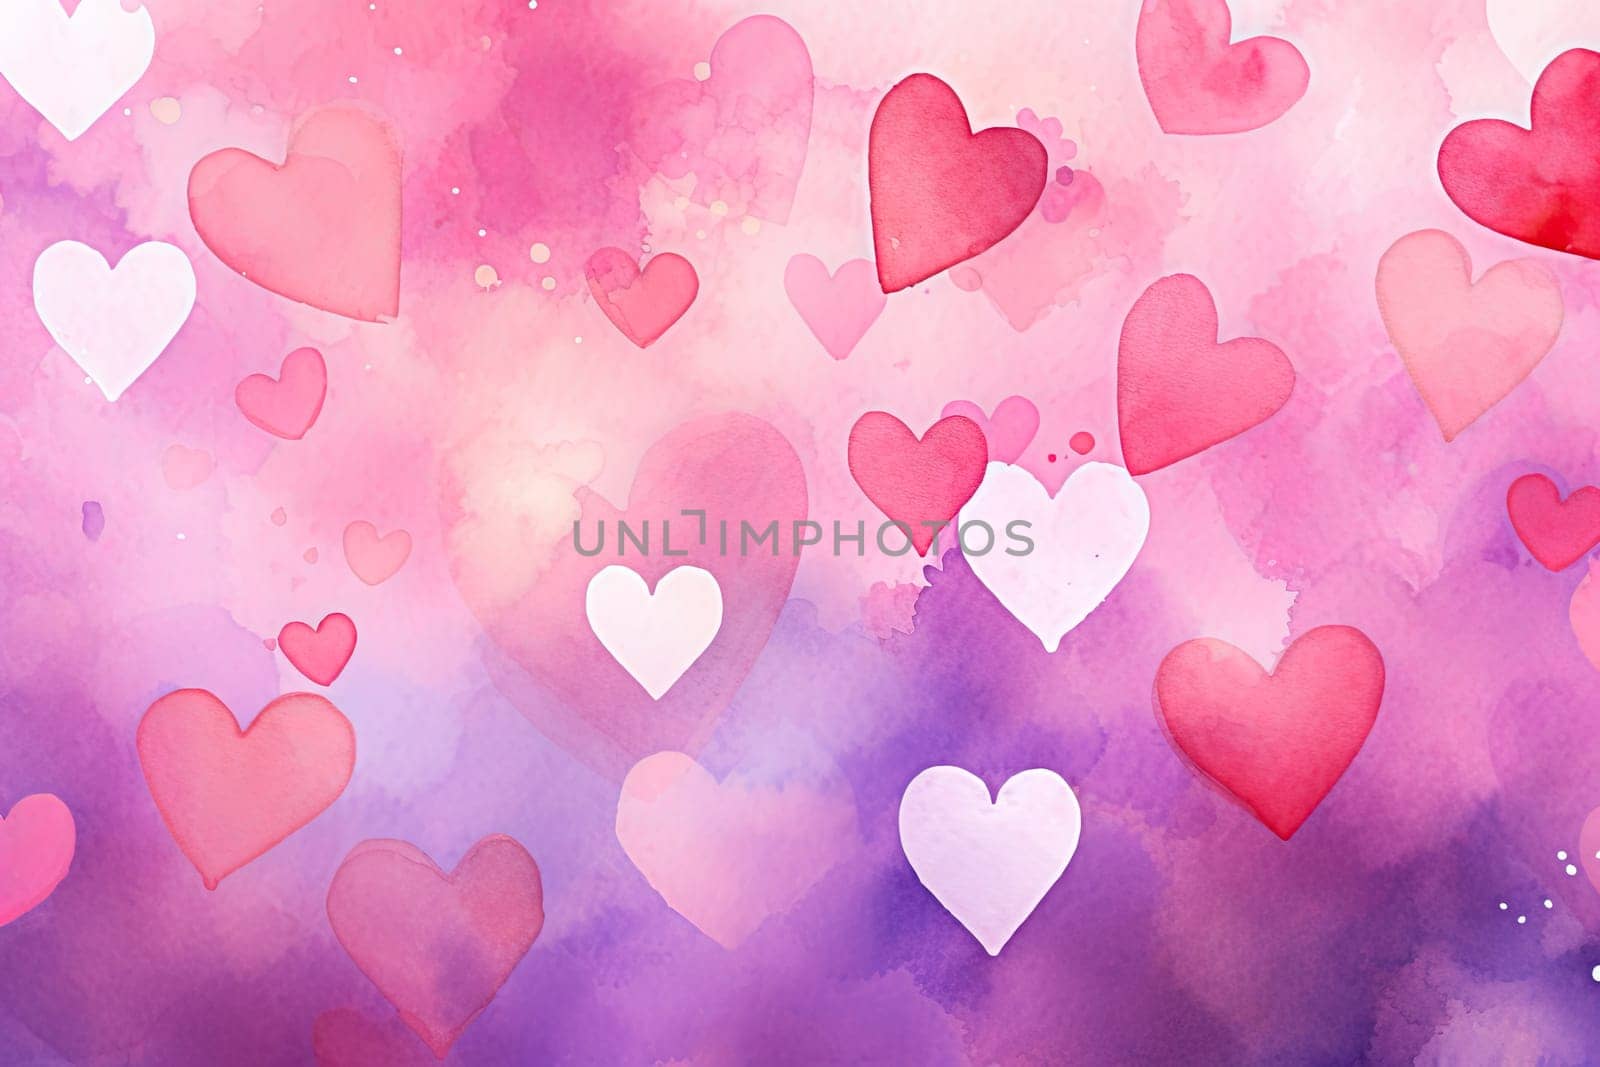 watercolor illustration of hearts on very soft and sweet pastel color abstract background by papatonic